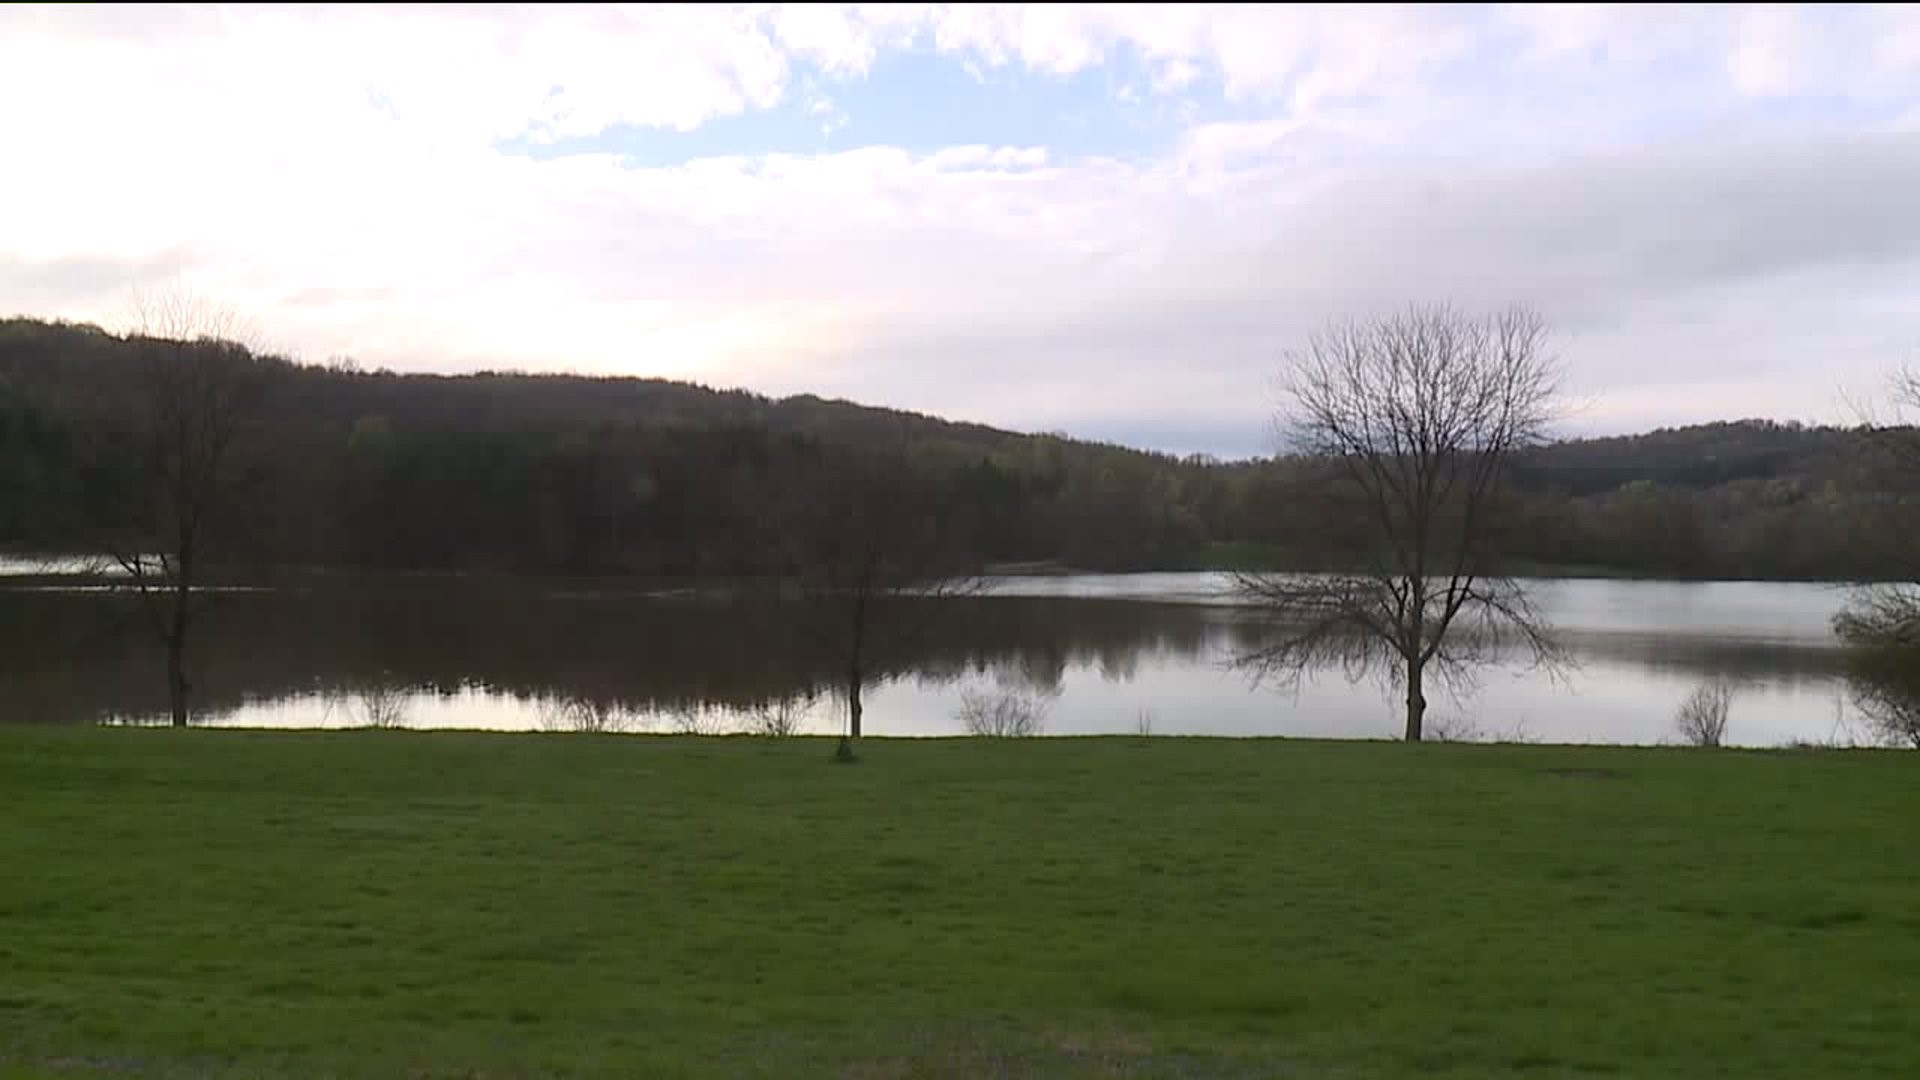 Celebrating Earth Day In Lackawanna State Park